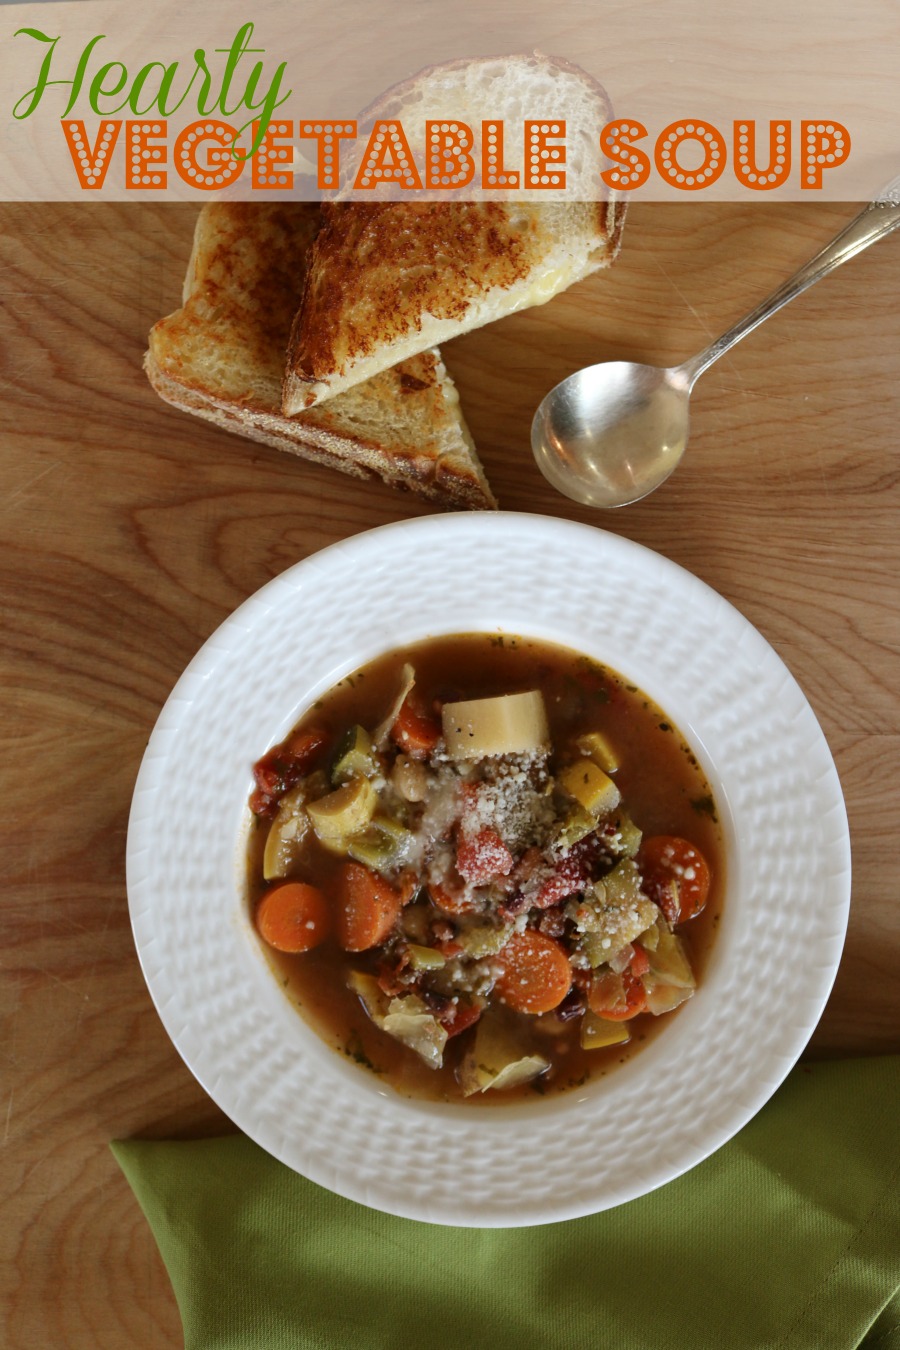  Hearty Vegetable Soup - paired with a Brie Grilled Cheese make this the perfect dinner option.